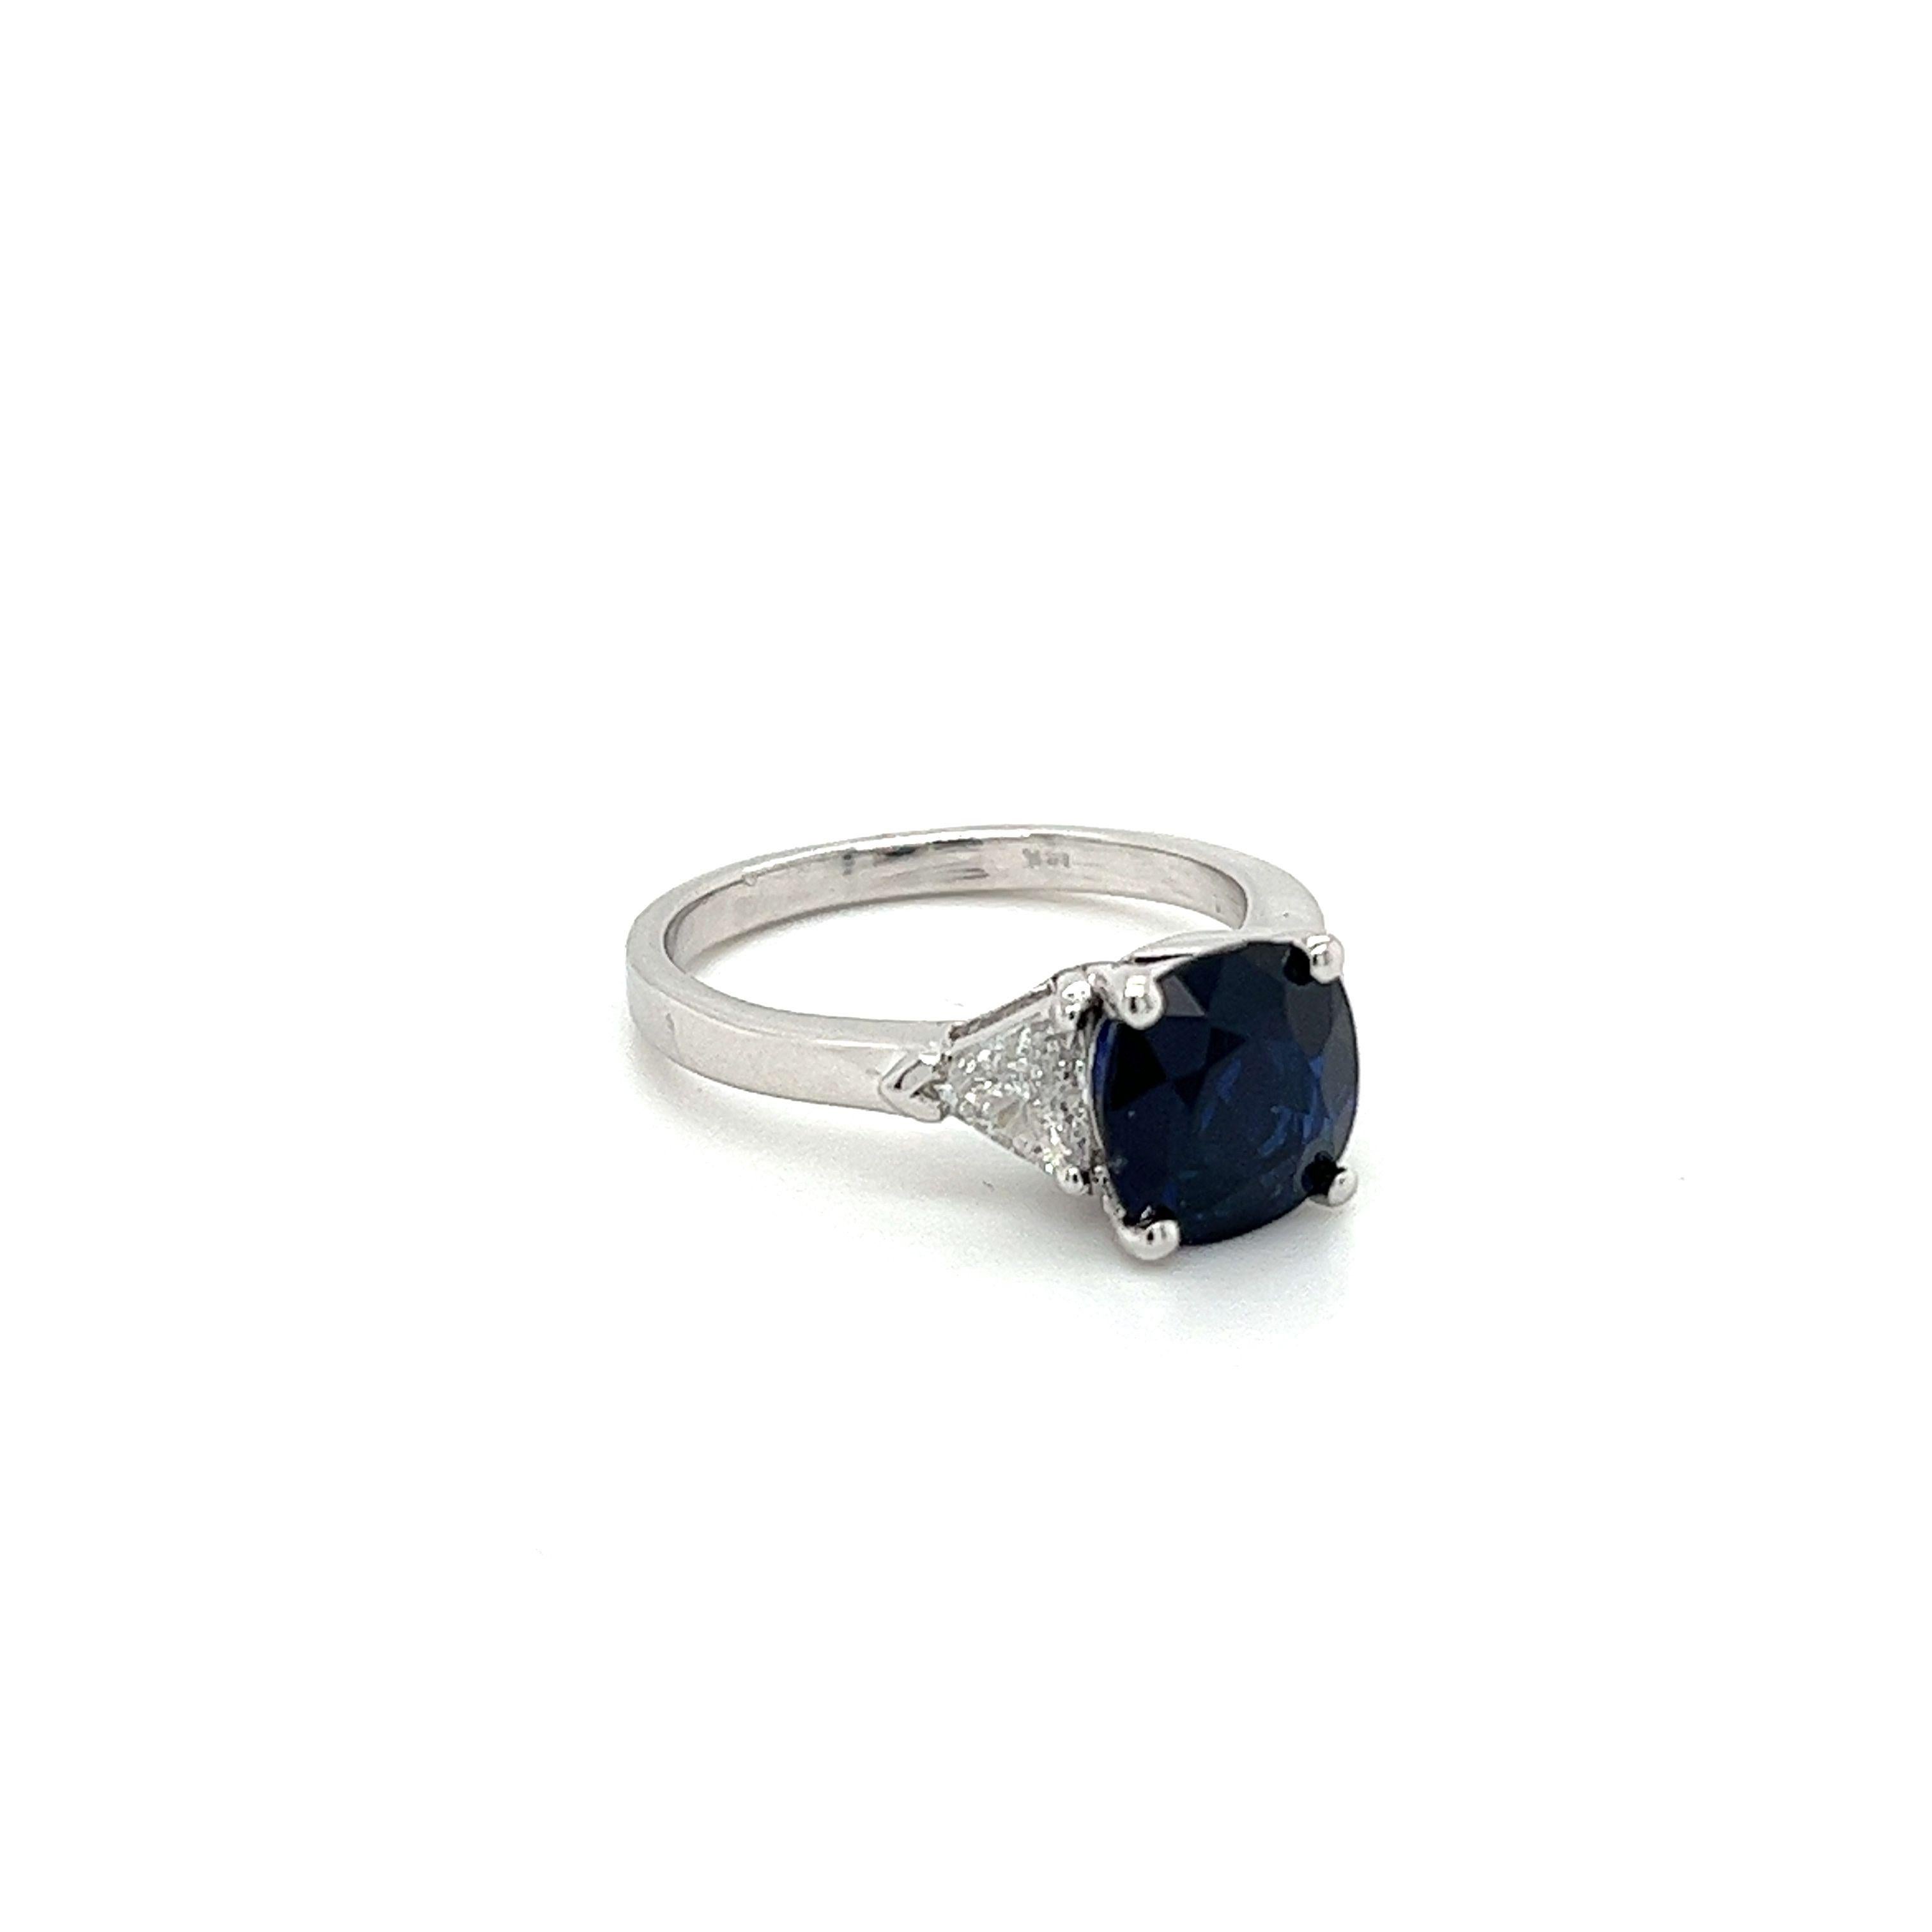 GIA Certified 2.63 Carat Blue Sapphire Ring with Trillion Cut Diamond Sidestones For Sale 1